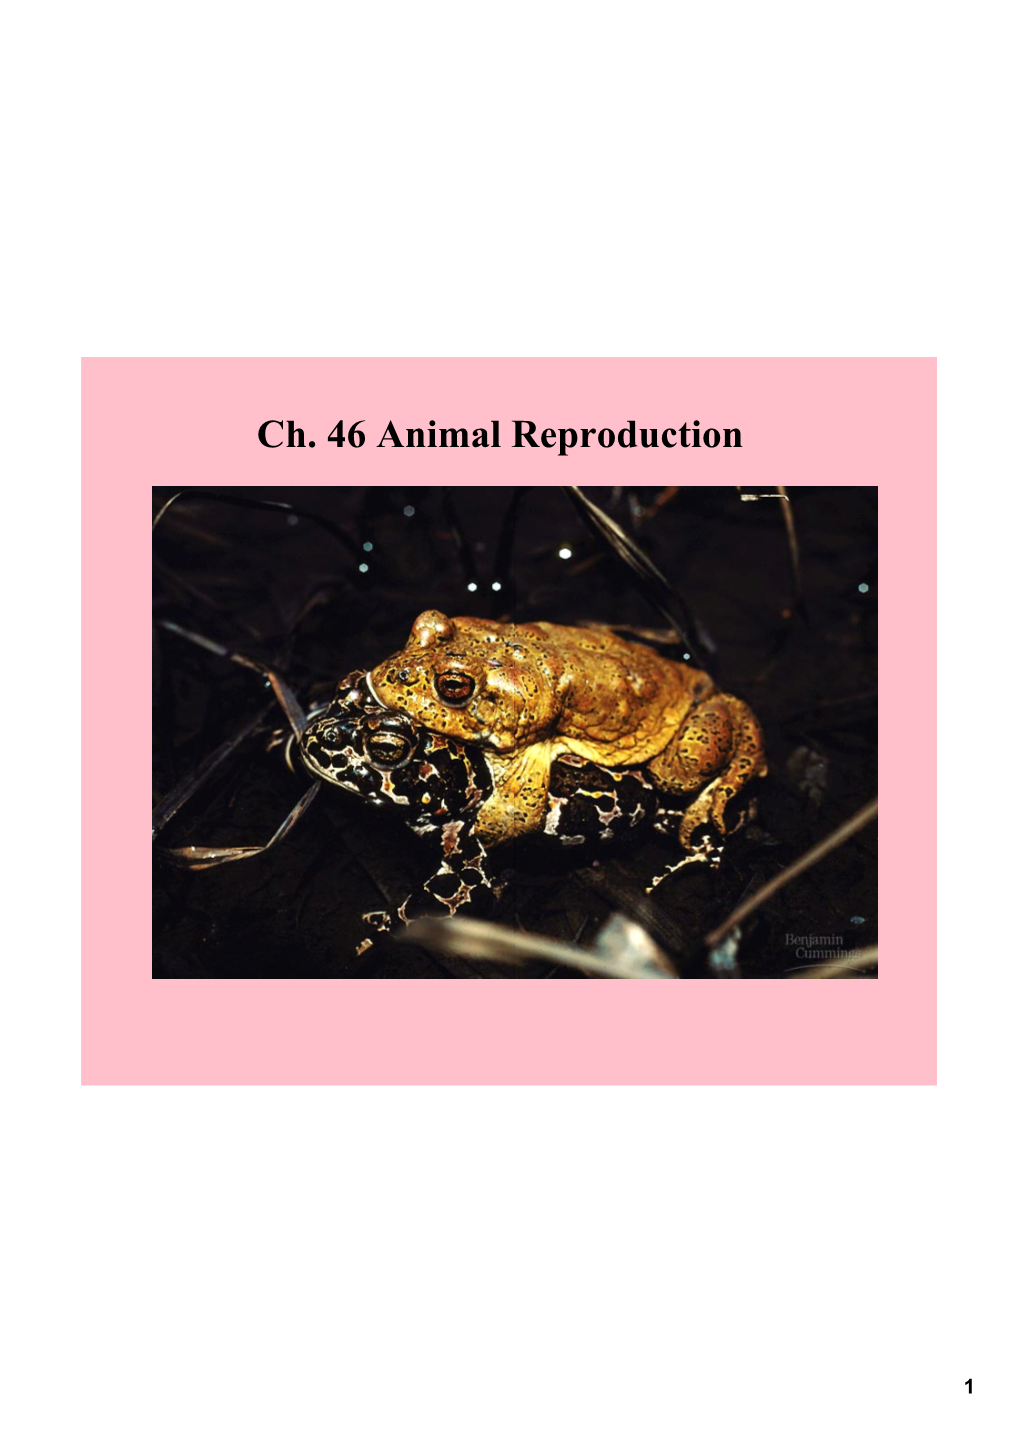 Ch. 46 Animal Reproduction